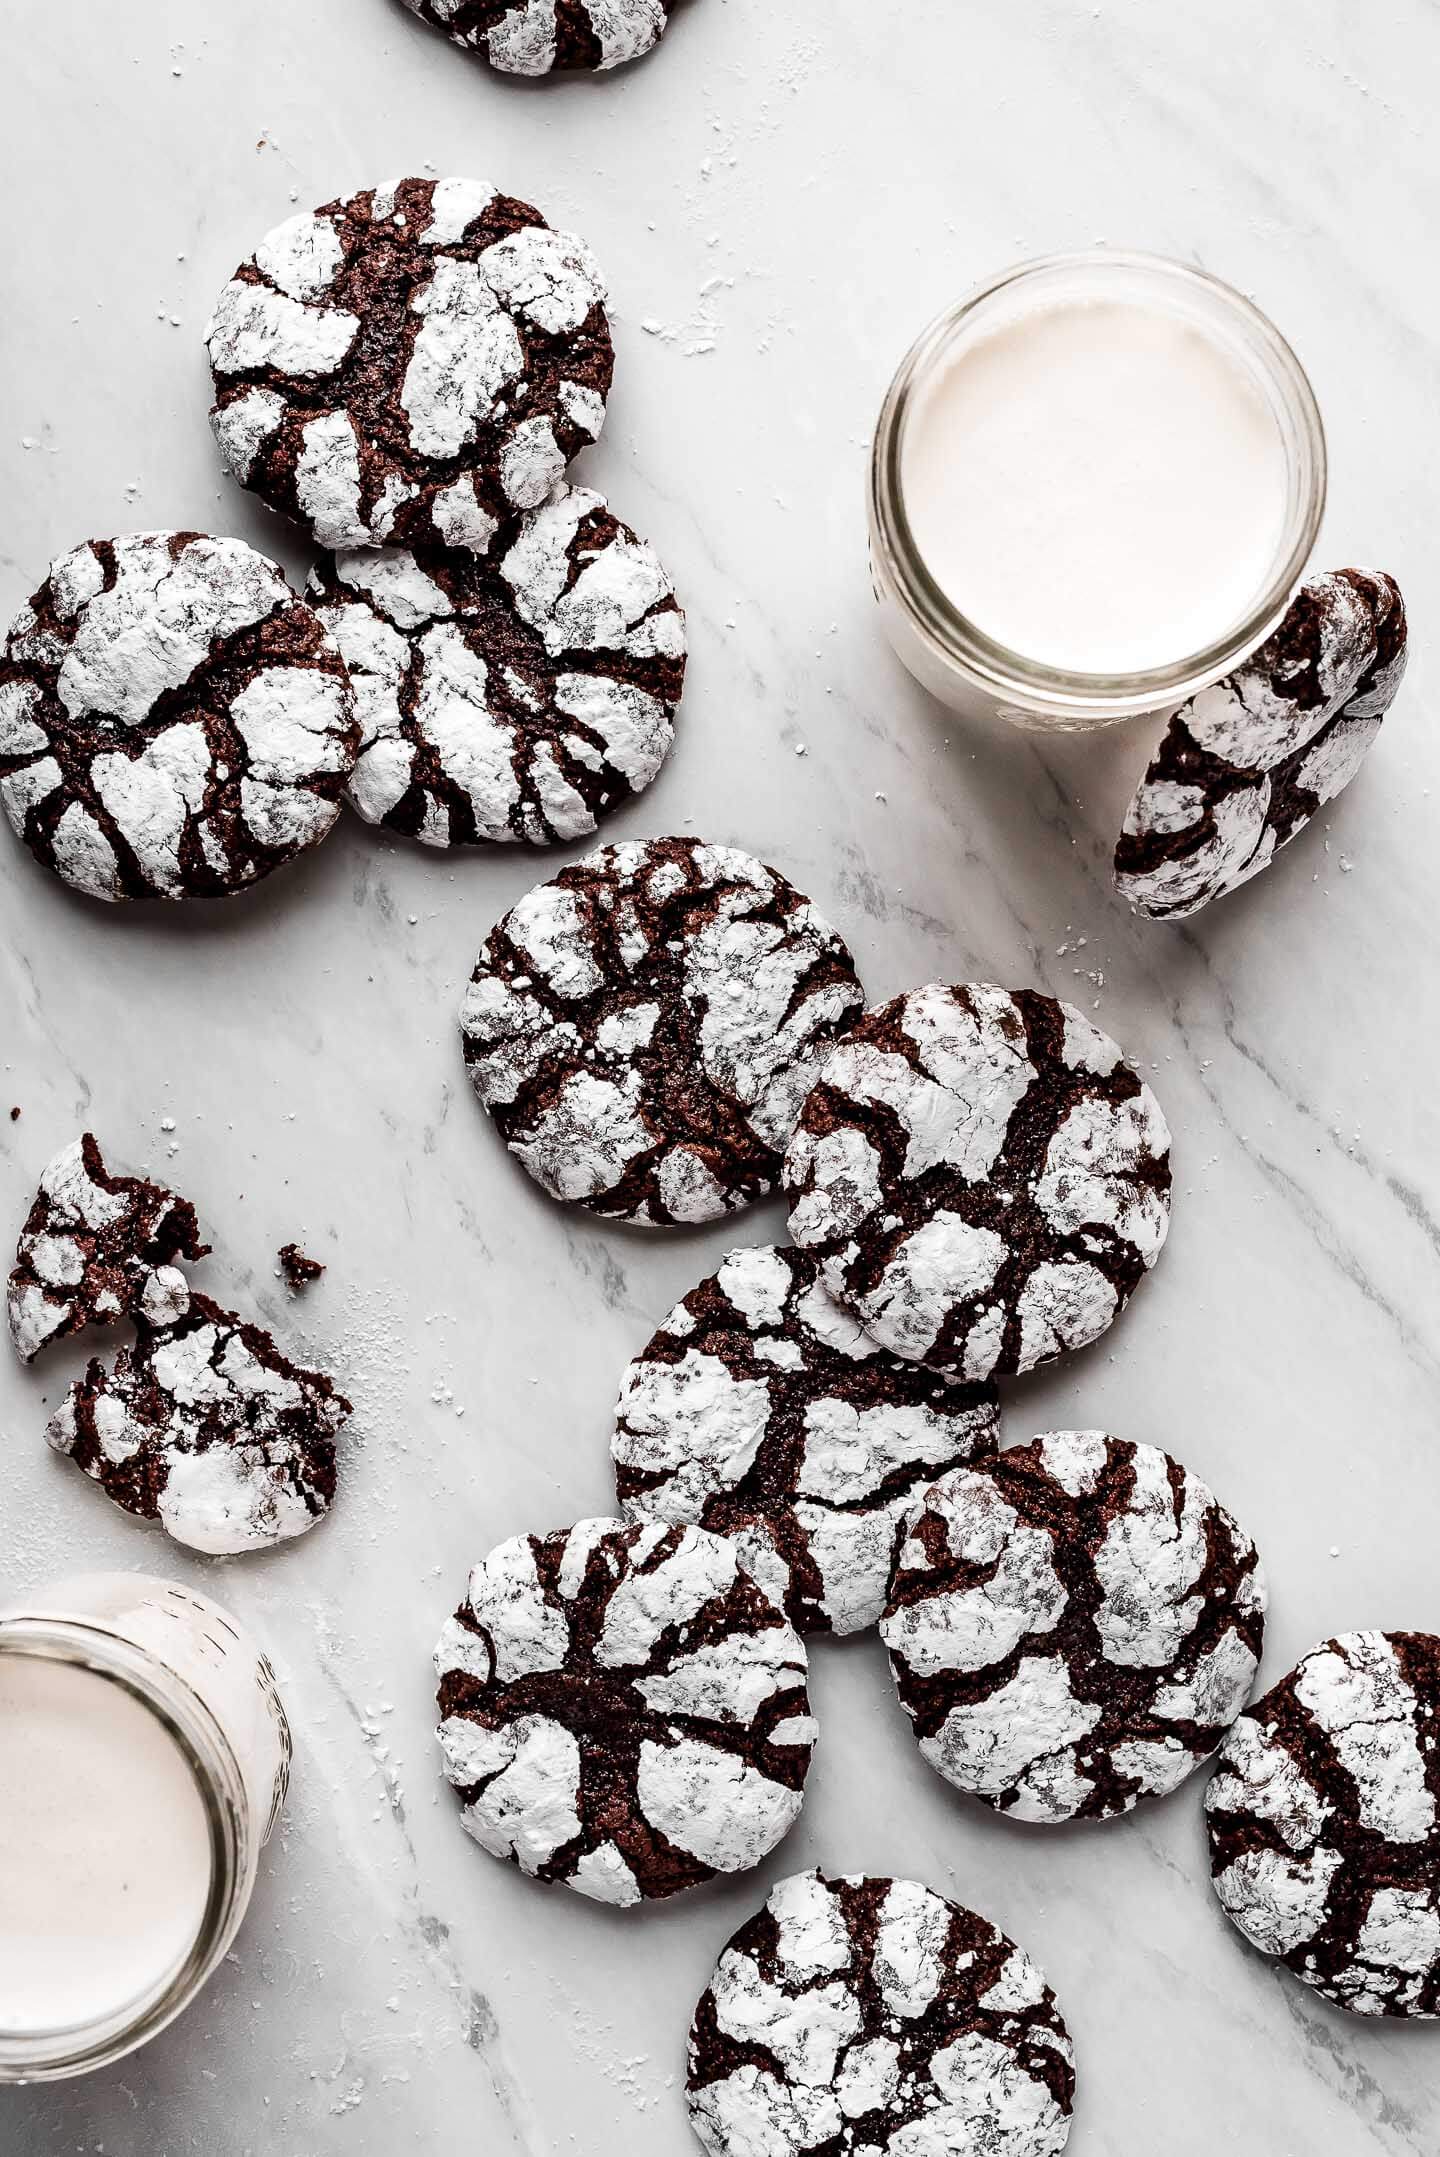 Chocolate Crinkle Cookies scattered on a marble surface with jars of milk.